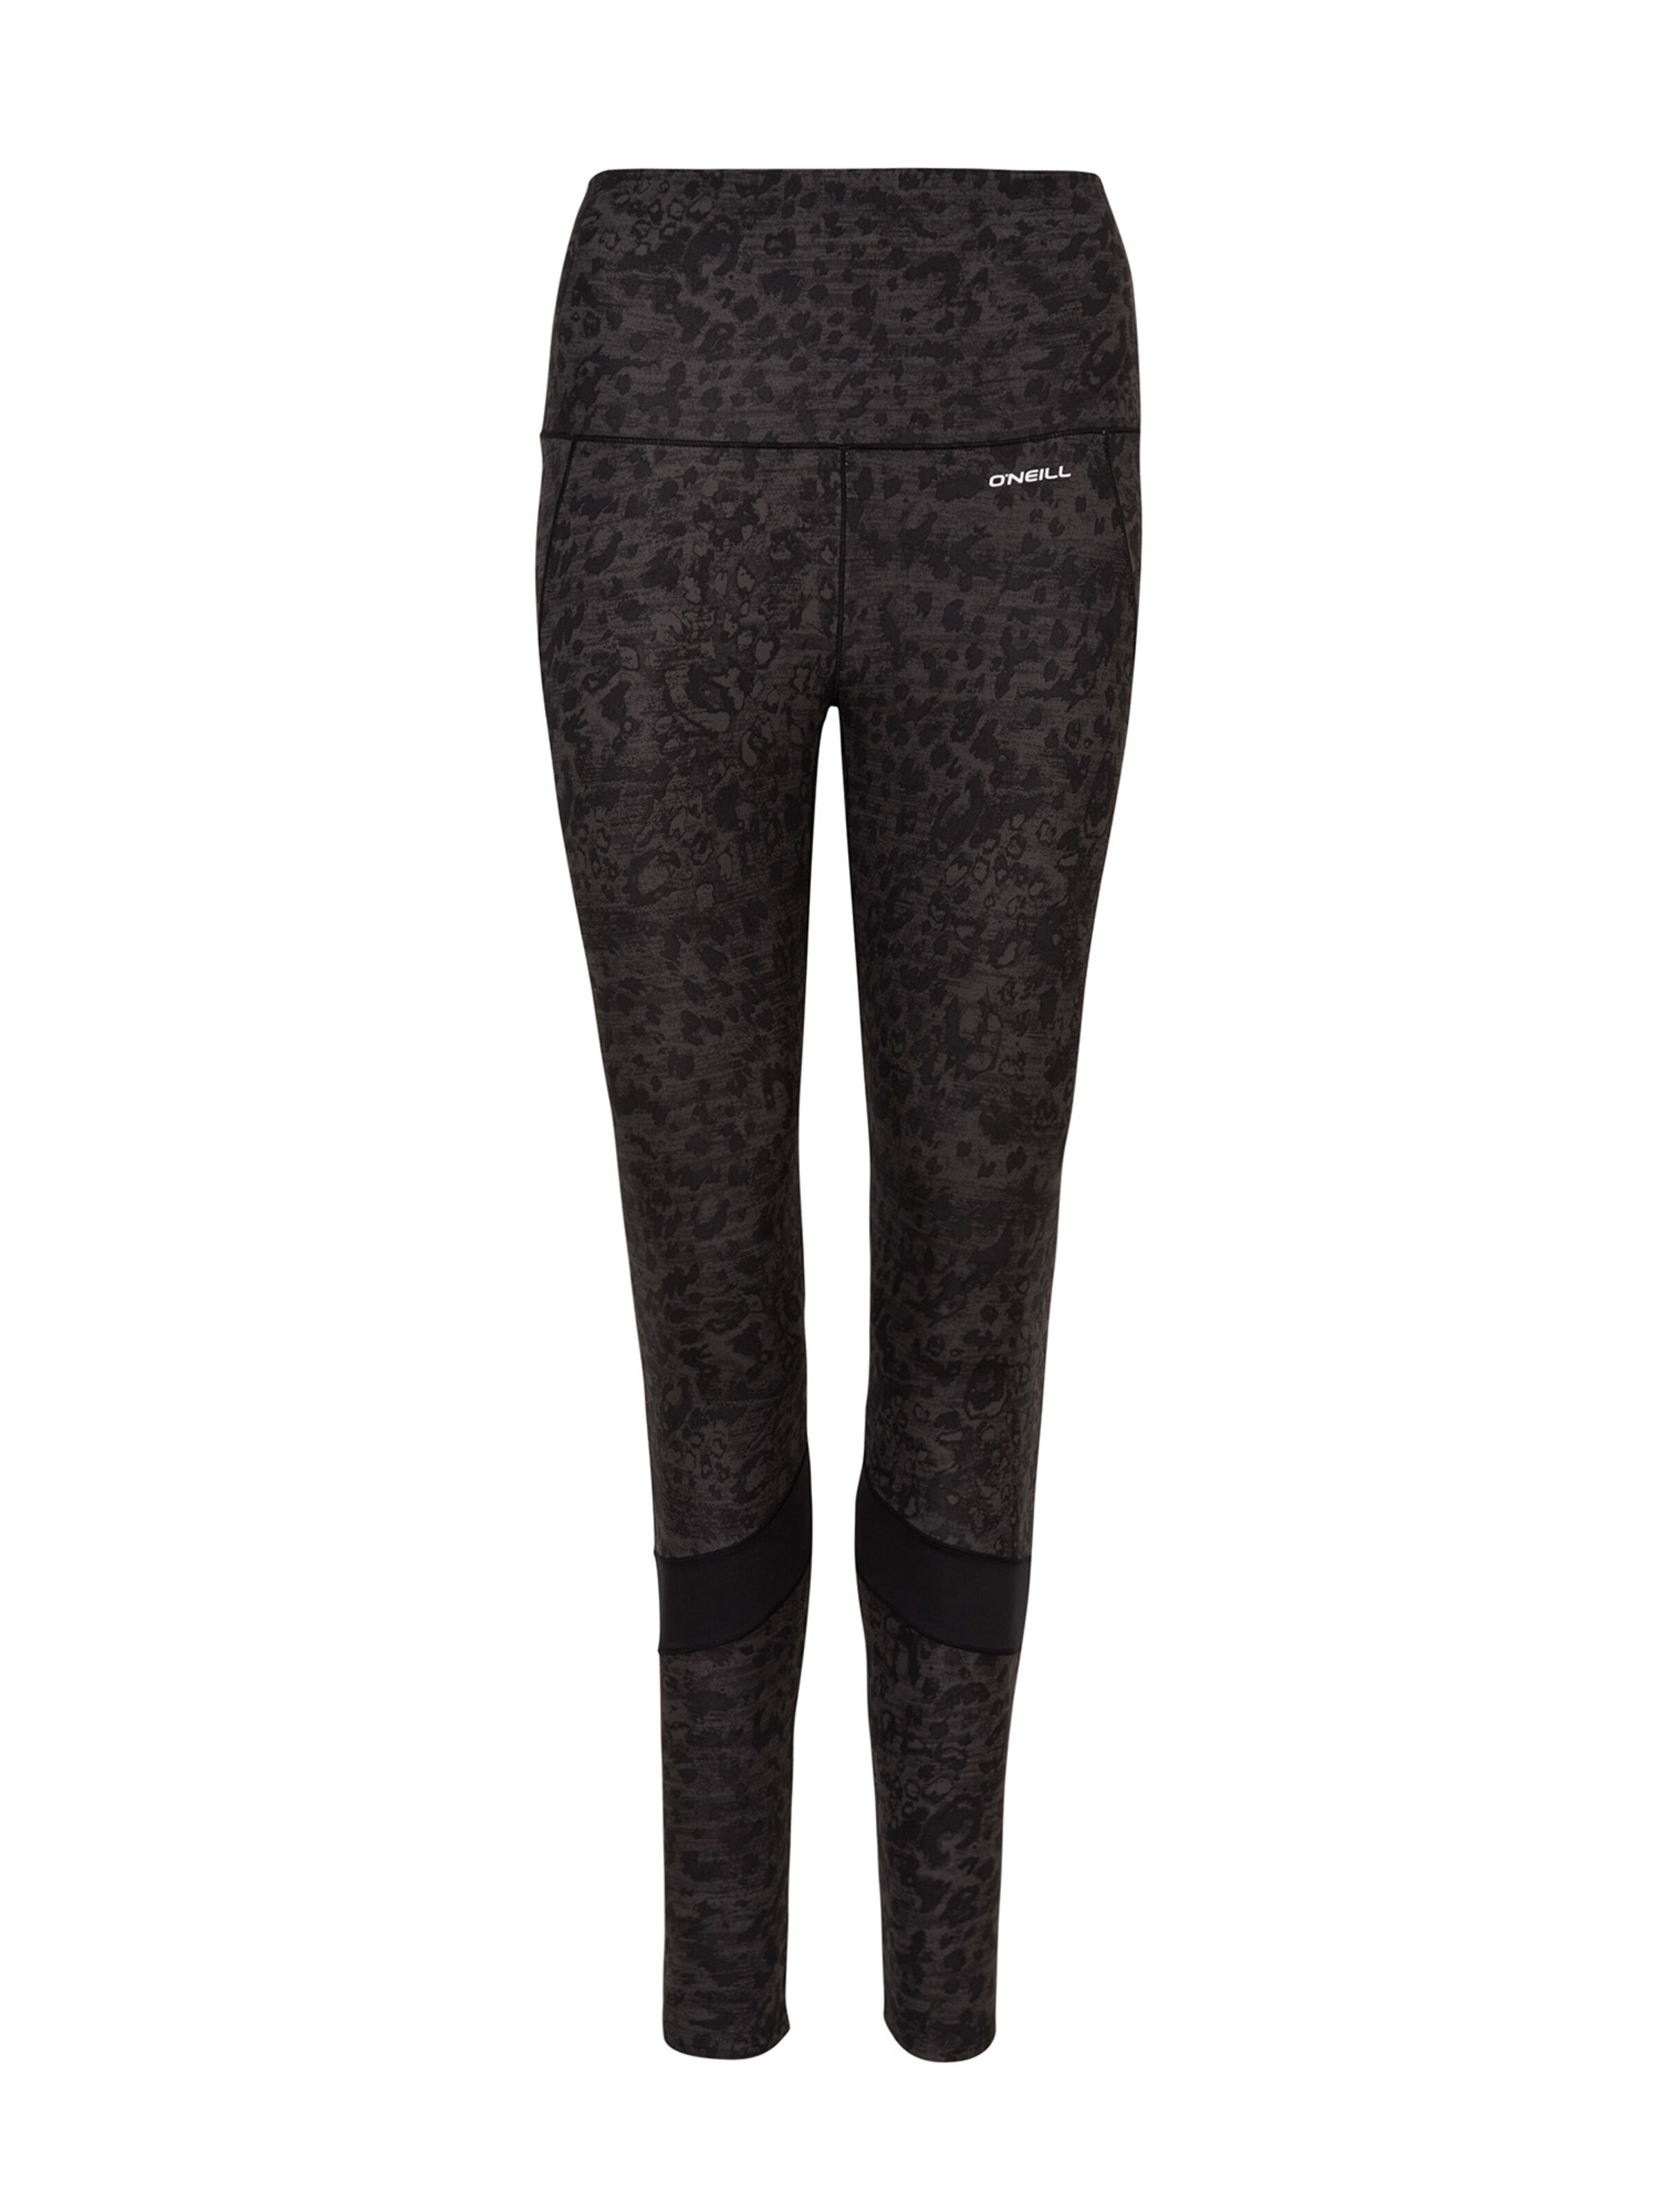 OGb8A Donna ONEILL Leggings in Grafite 